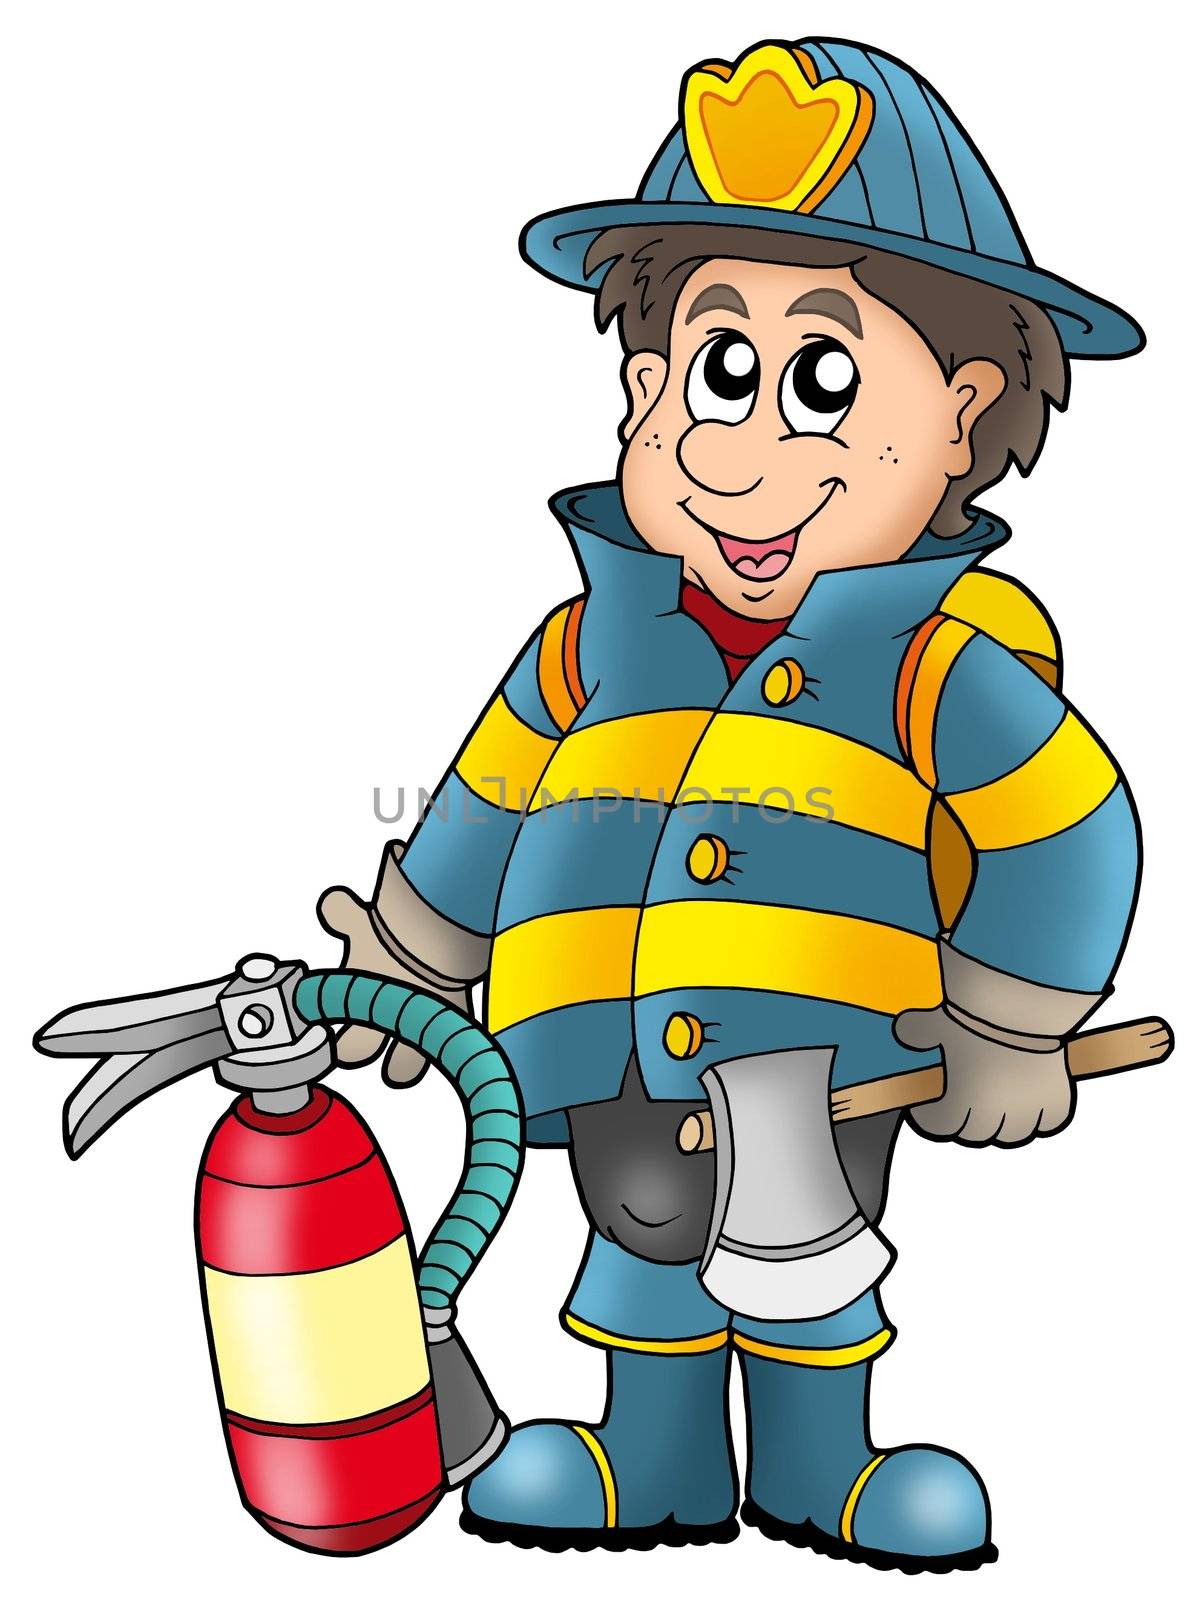 Fireman holding fire extinguisher by clairev